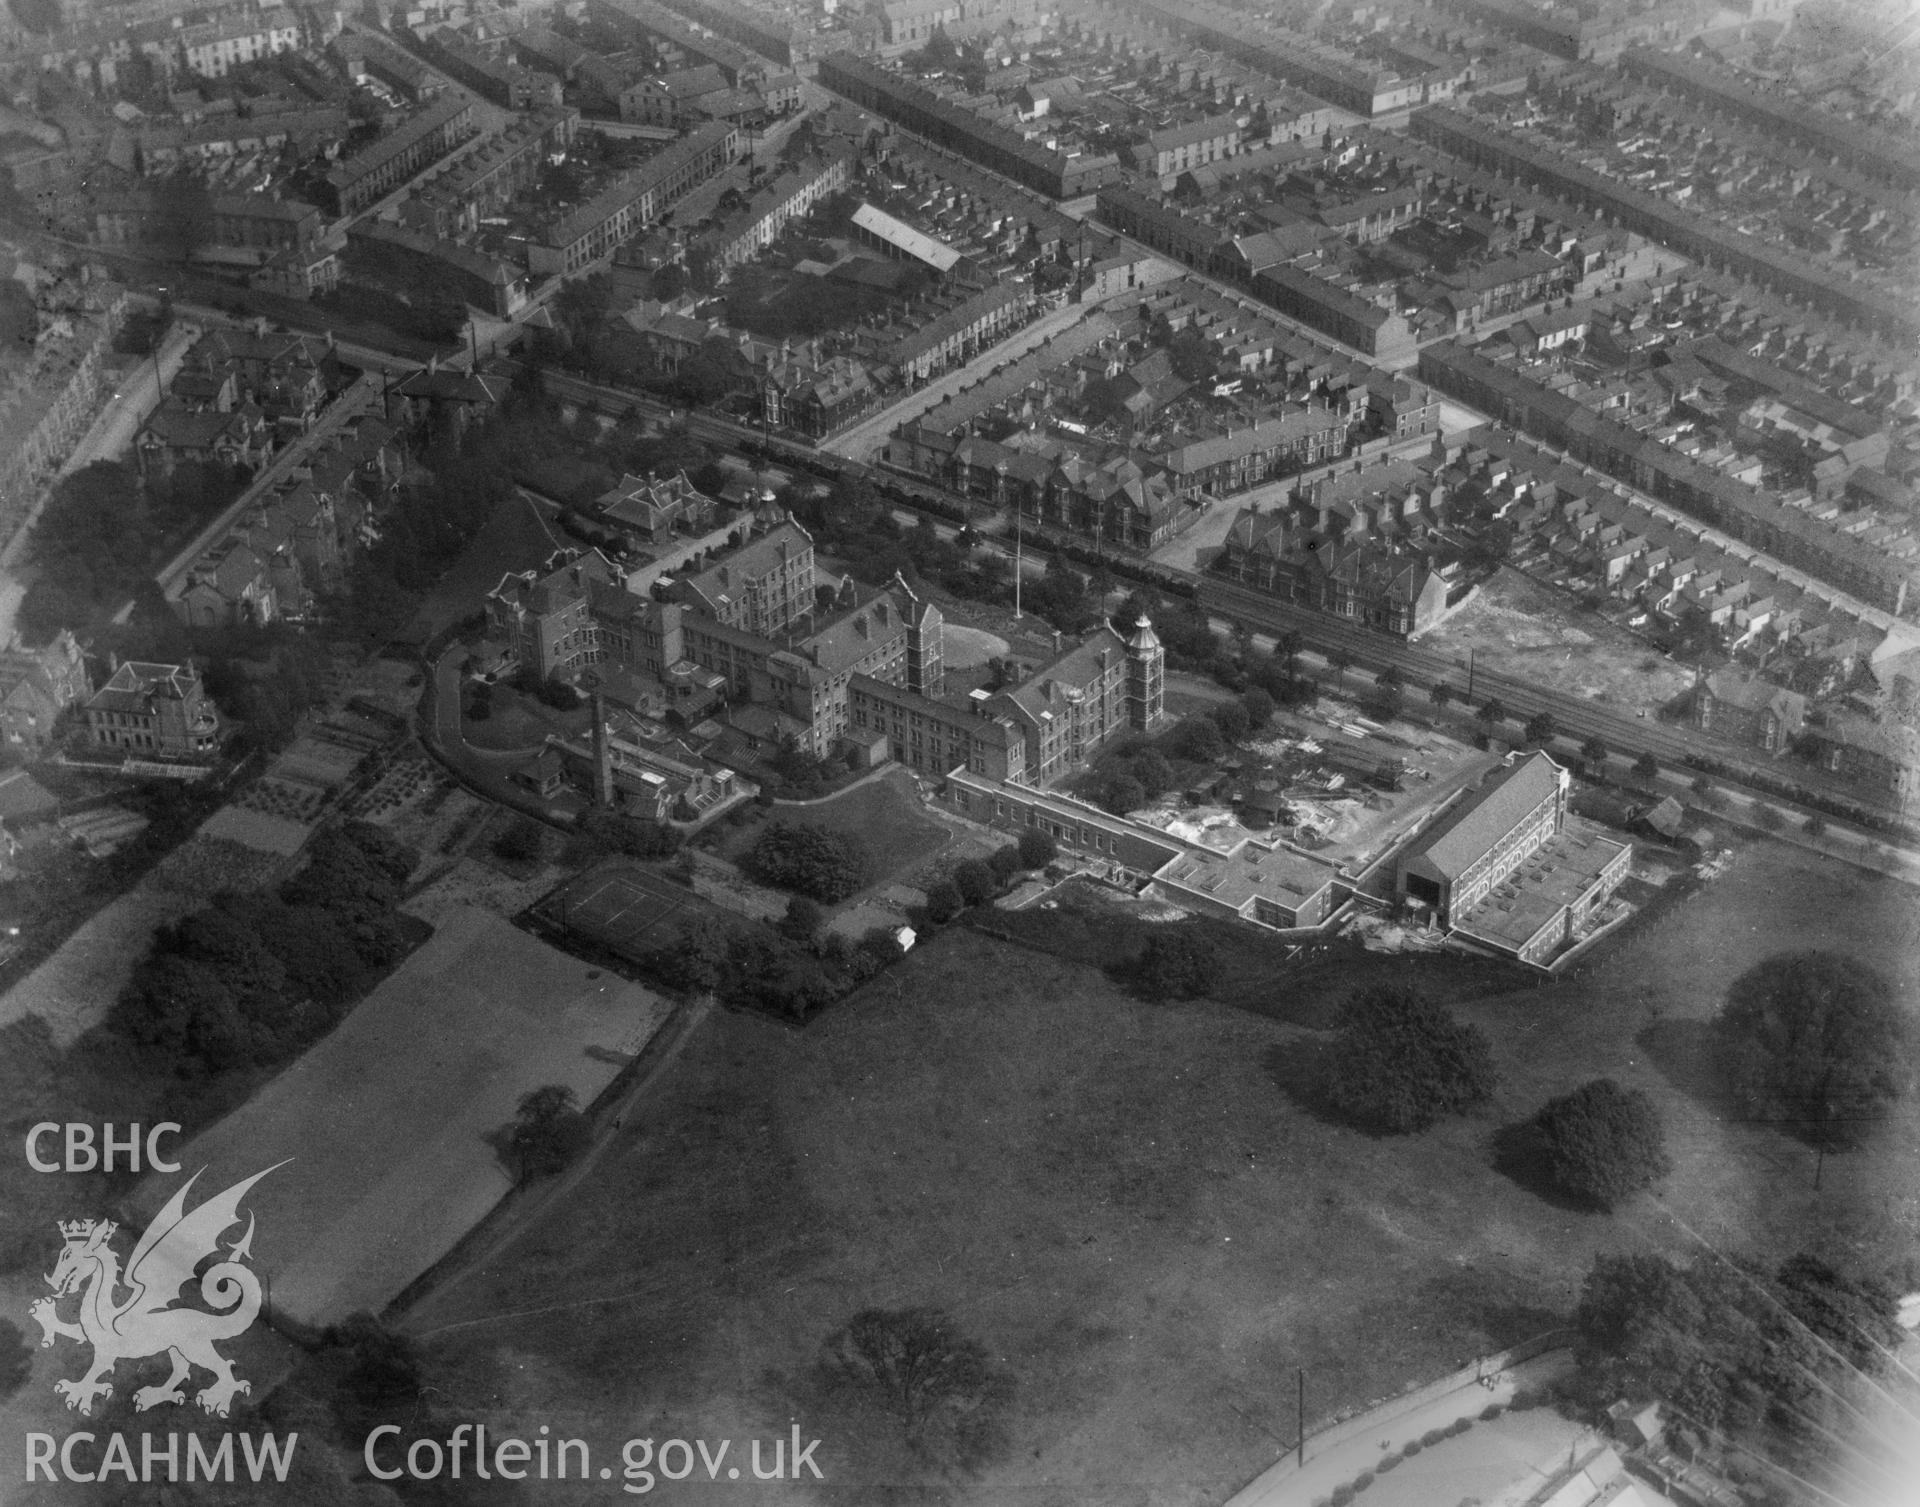 View of Cardiff showing Royal Infirmary, oblique aerial view. 5?x4? black and white glass plate negative.